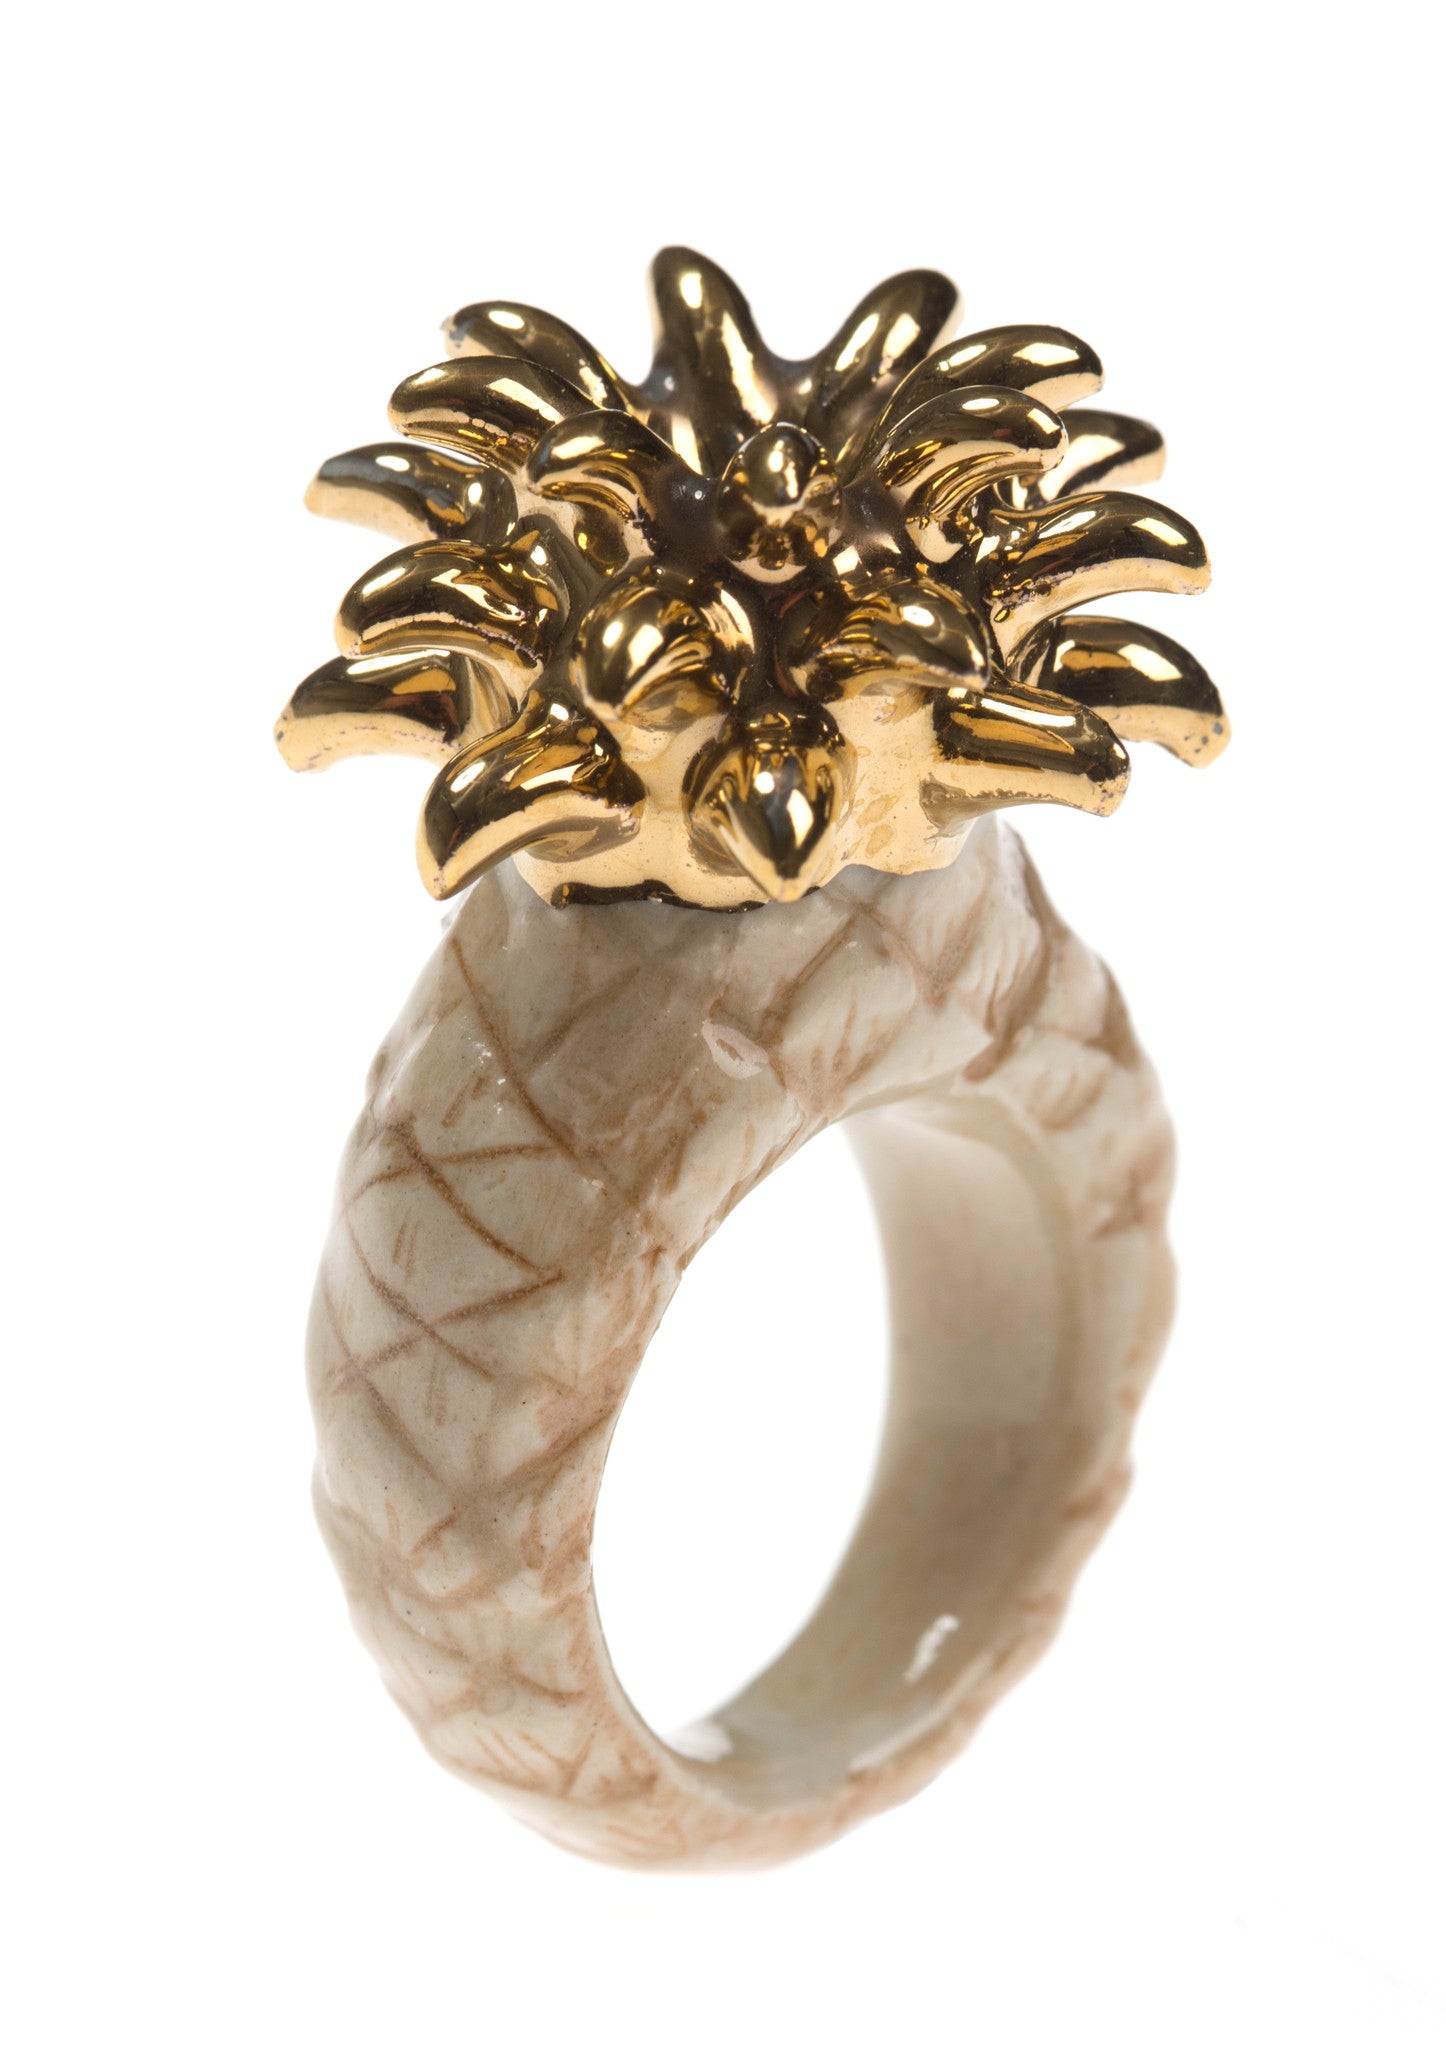 Beige & Gold Pineapple Ring